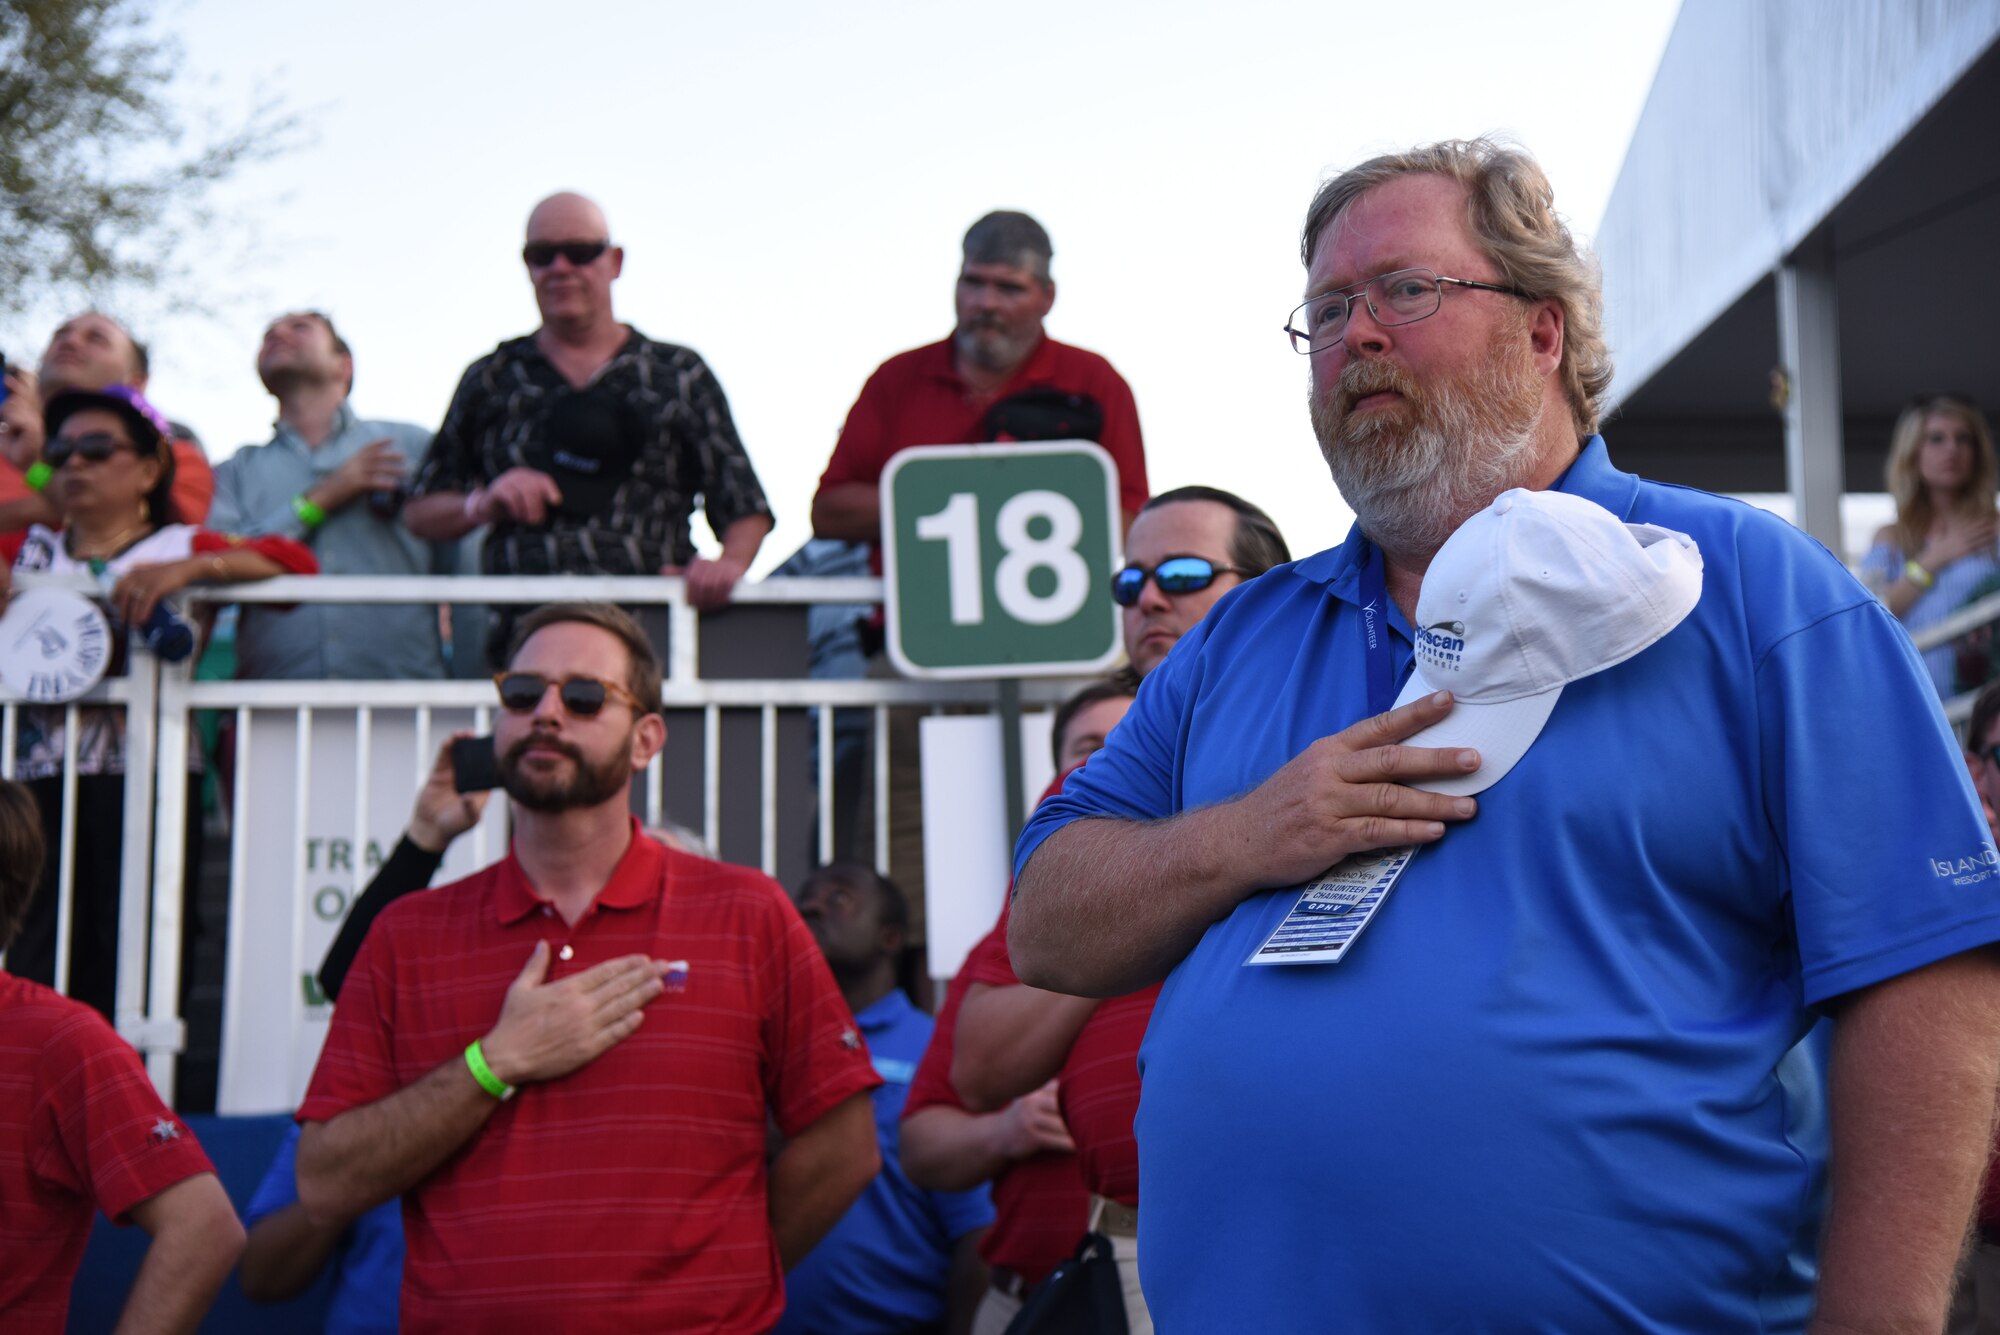 Sam Foster, 81st Training Wing information protection chief, places his hand over his heart during the singing of the national anthem during the Rapiscan Systems Classic Champions Tour at Fallen Oak Golf Club March 25, 2018, in Saucier, Mississippi. Keesler personnel performed the national anthem and presented the colors during the closing ceremony of the three-day event. This is the fifth year that the event has been held on the coast. (U.S. Air Force photo by Kemberly Groue)